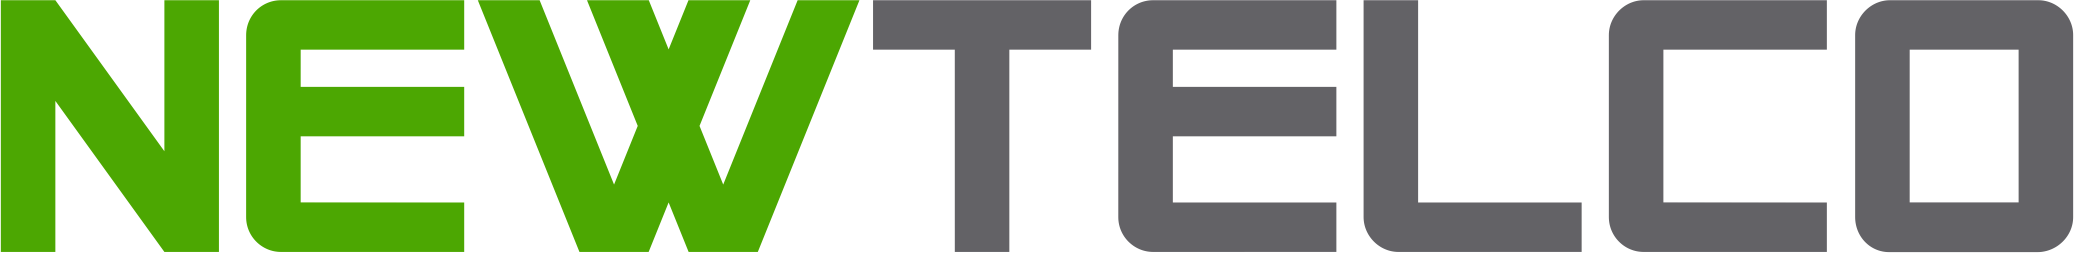 NT NEW LOGO 2016.png